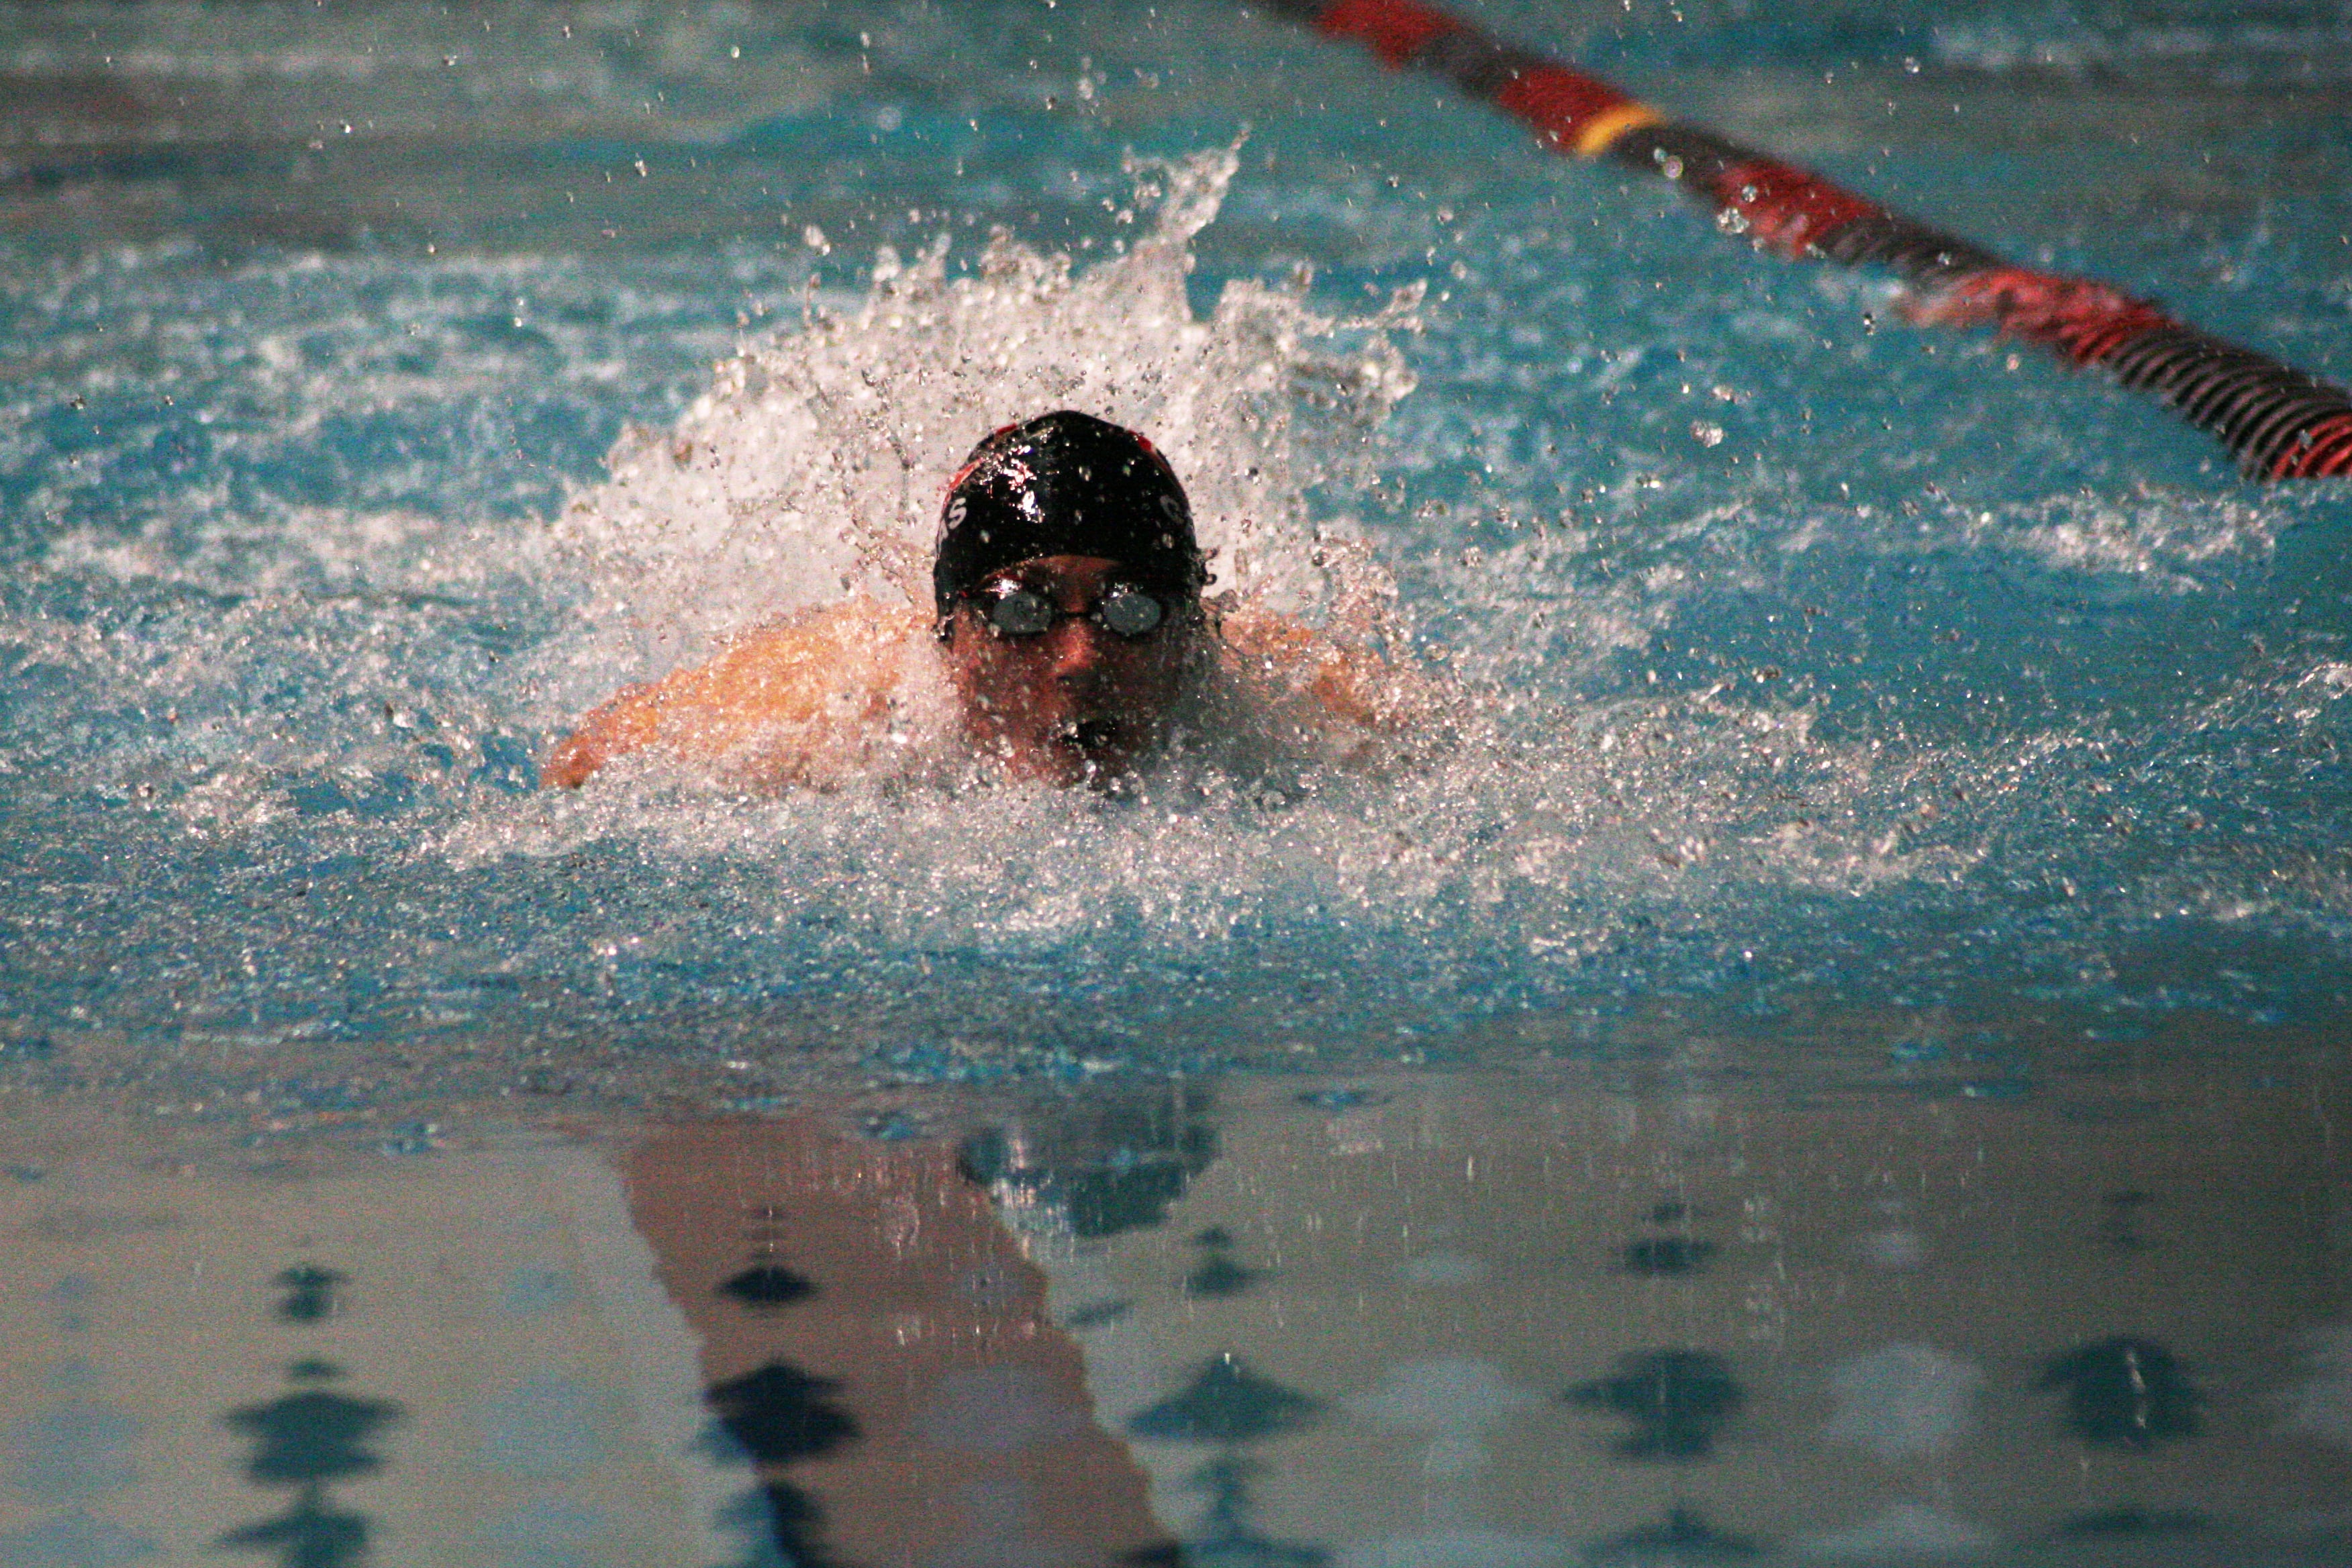 Lucas Ulmer on his way to a state championship in the 100 butterfly.